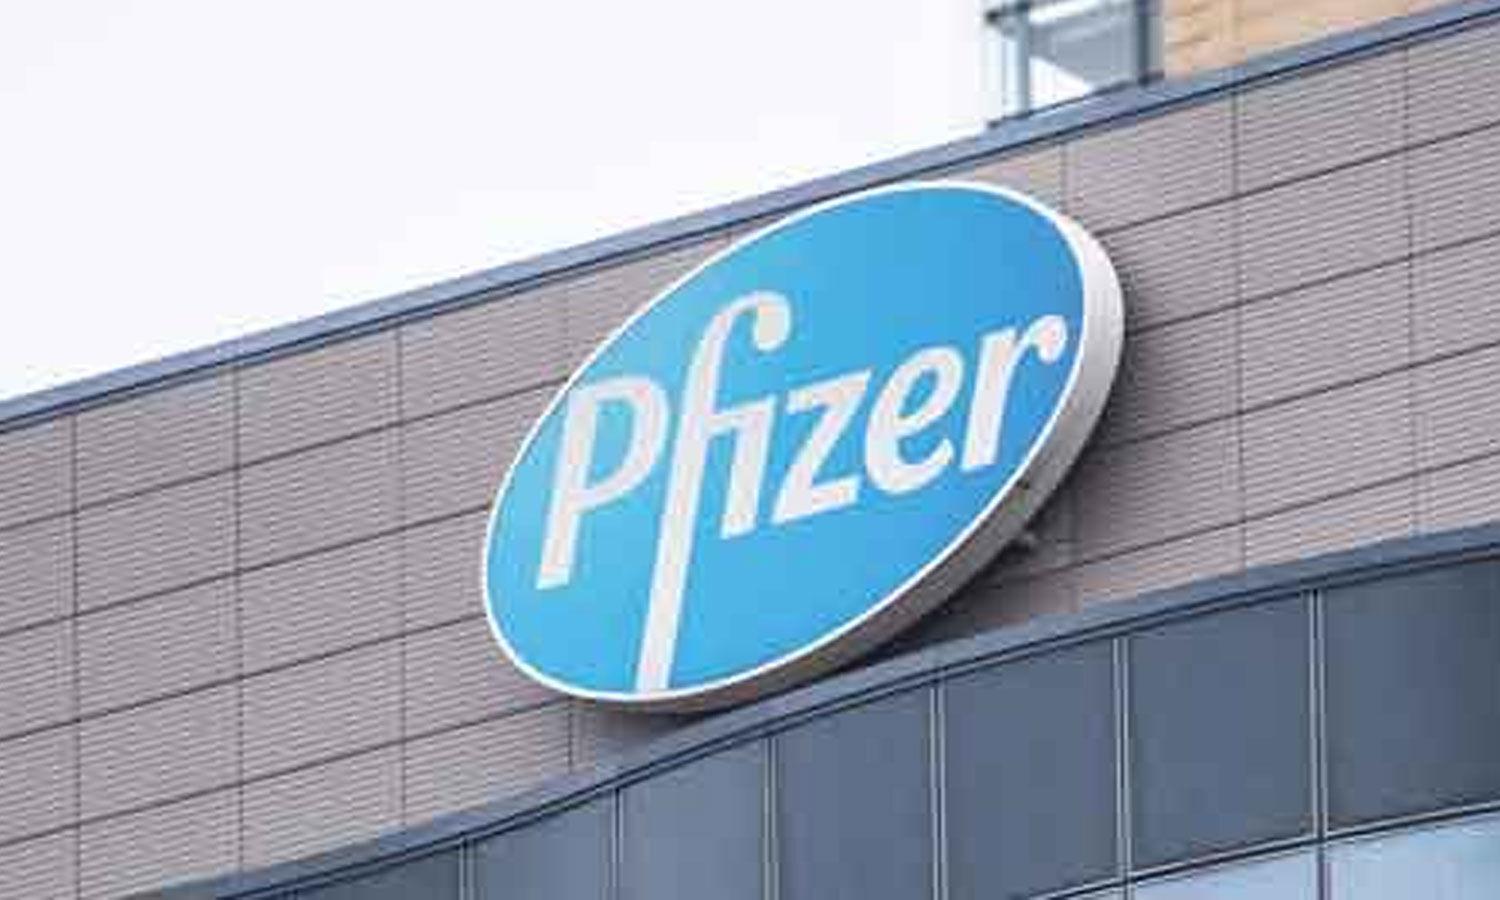 Pfizer receives European approval for Oncology Biosimilar, RUXIENCE (rituximab)